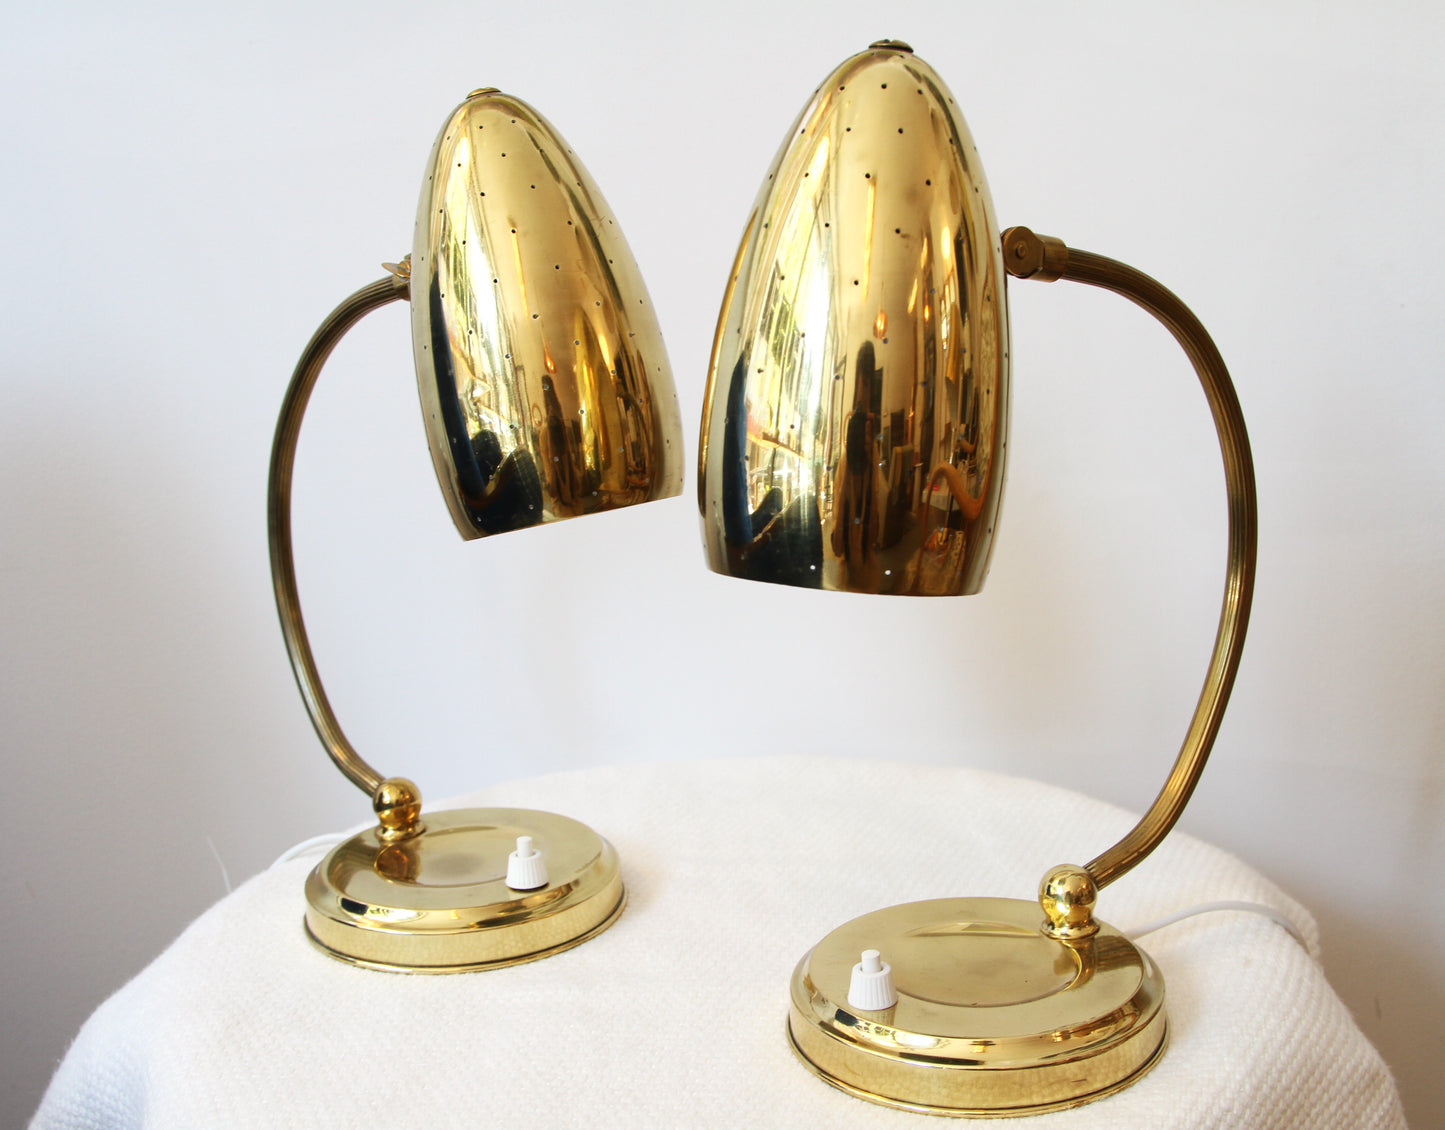 Charming Itsu Brass Table Lamps, 1950s